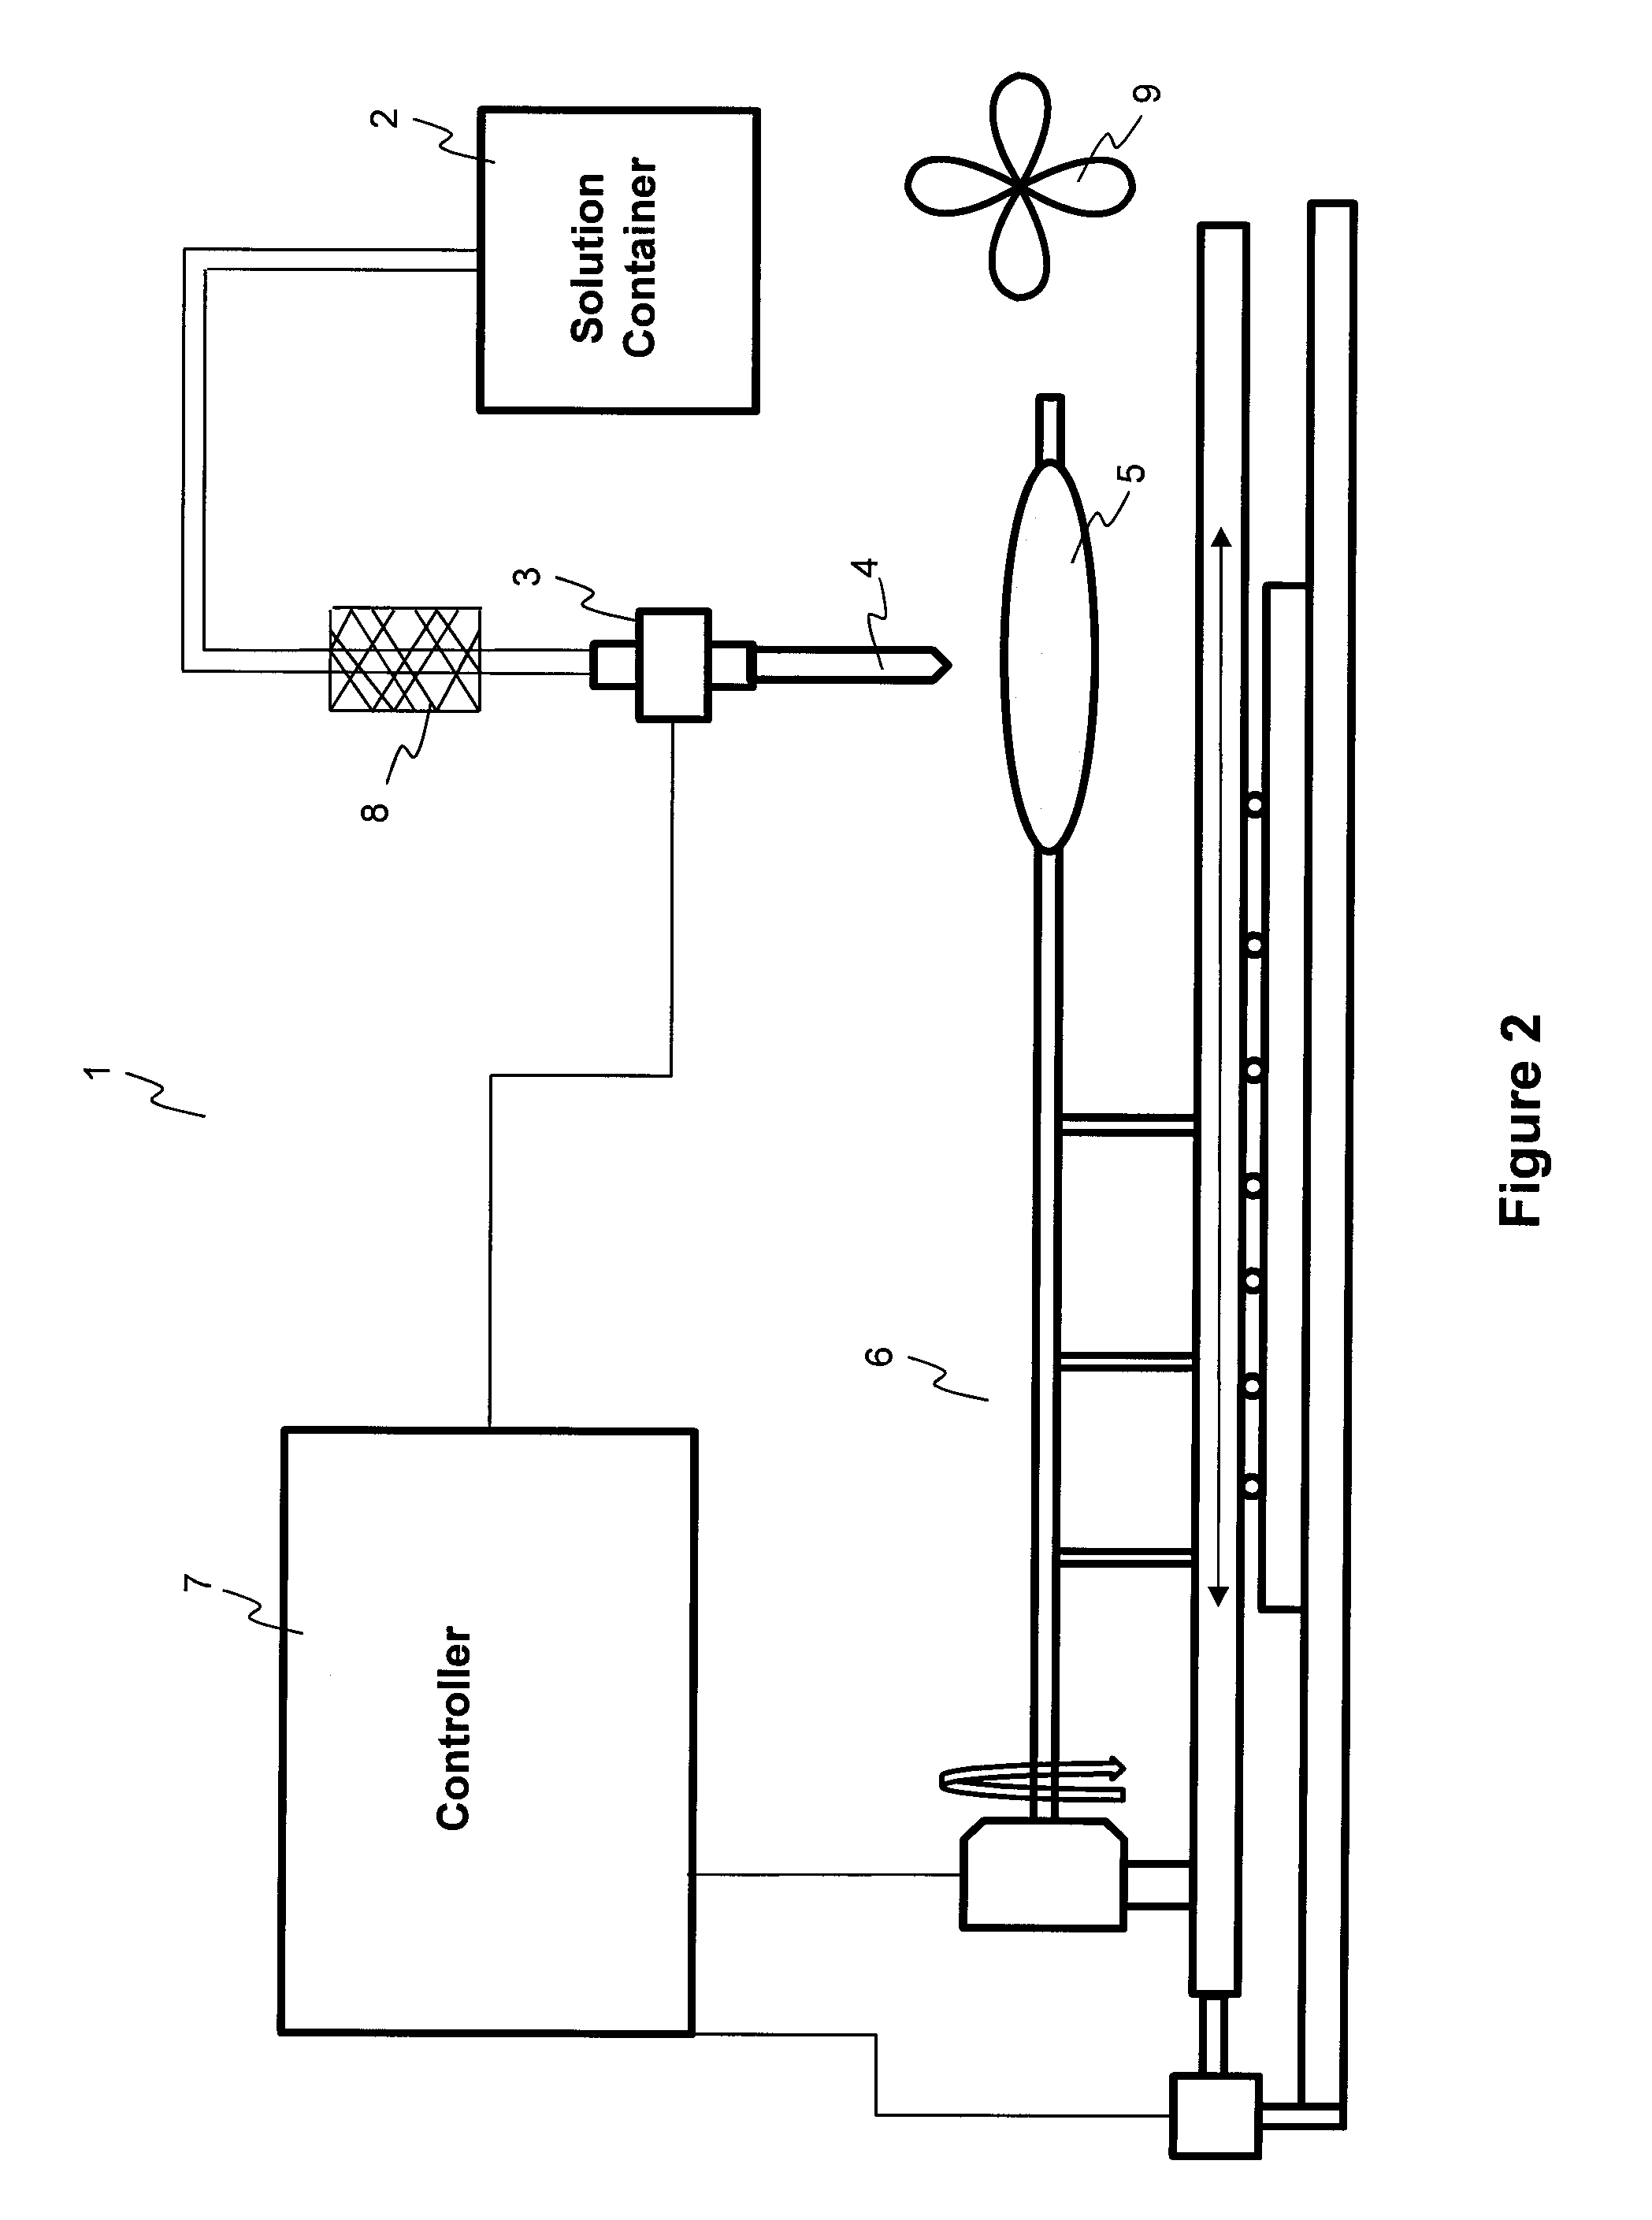 Methods and apparatuses for coating balloon catheters